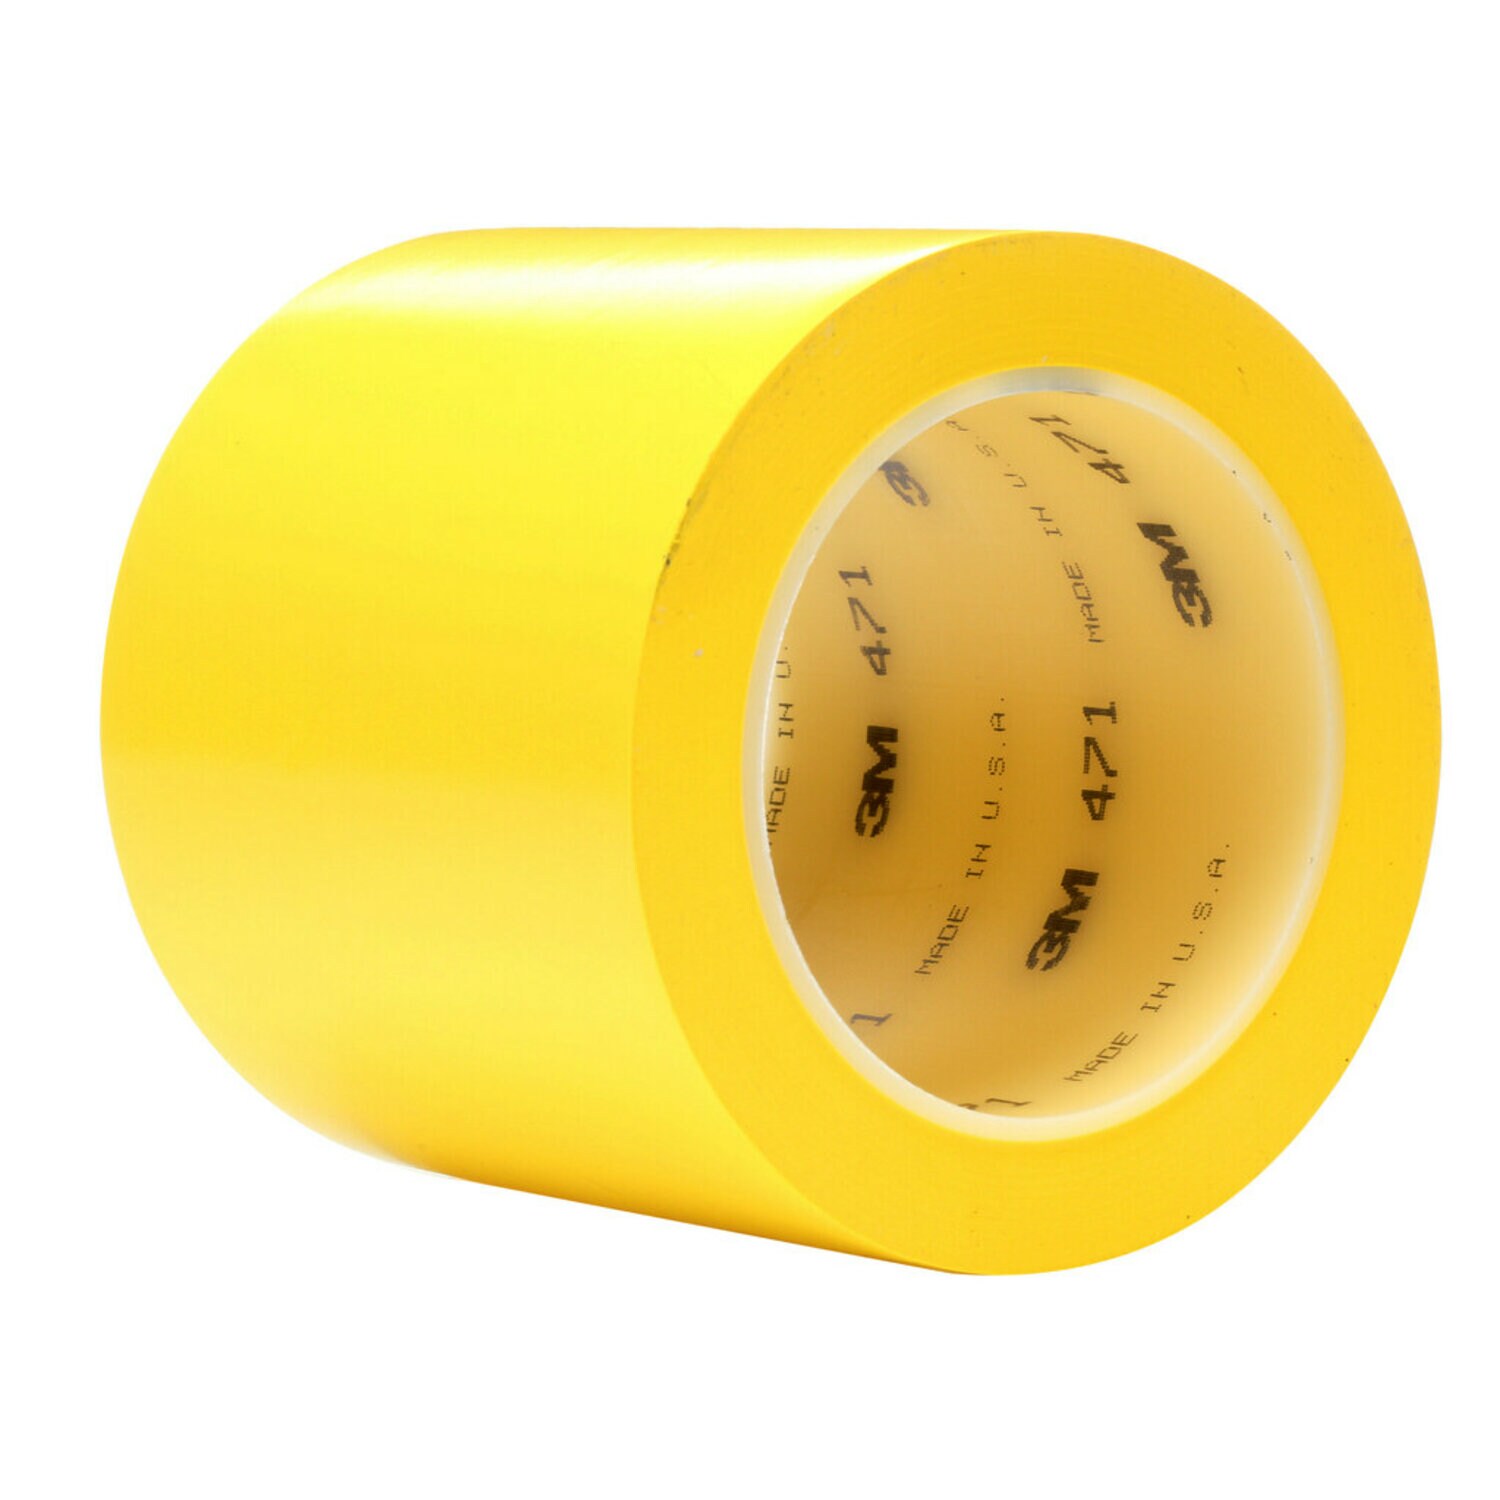 3M Duct Tape, Yellow, 3 x 50 yd., PK18 3903